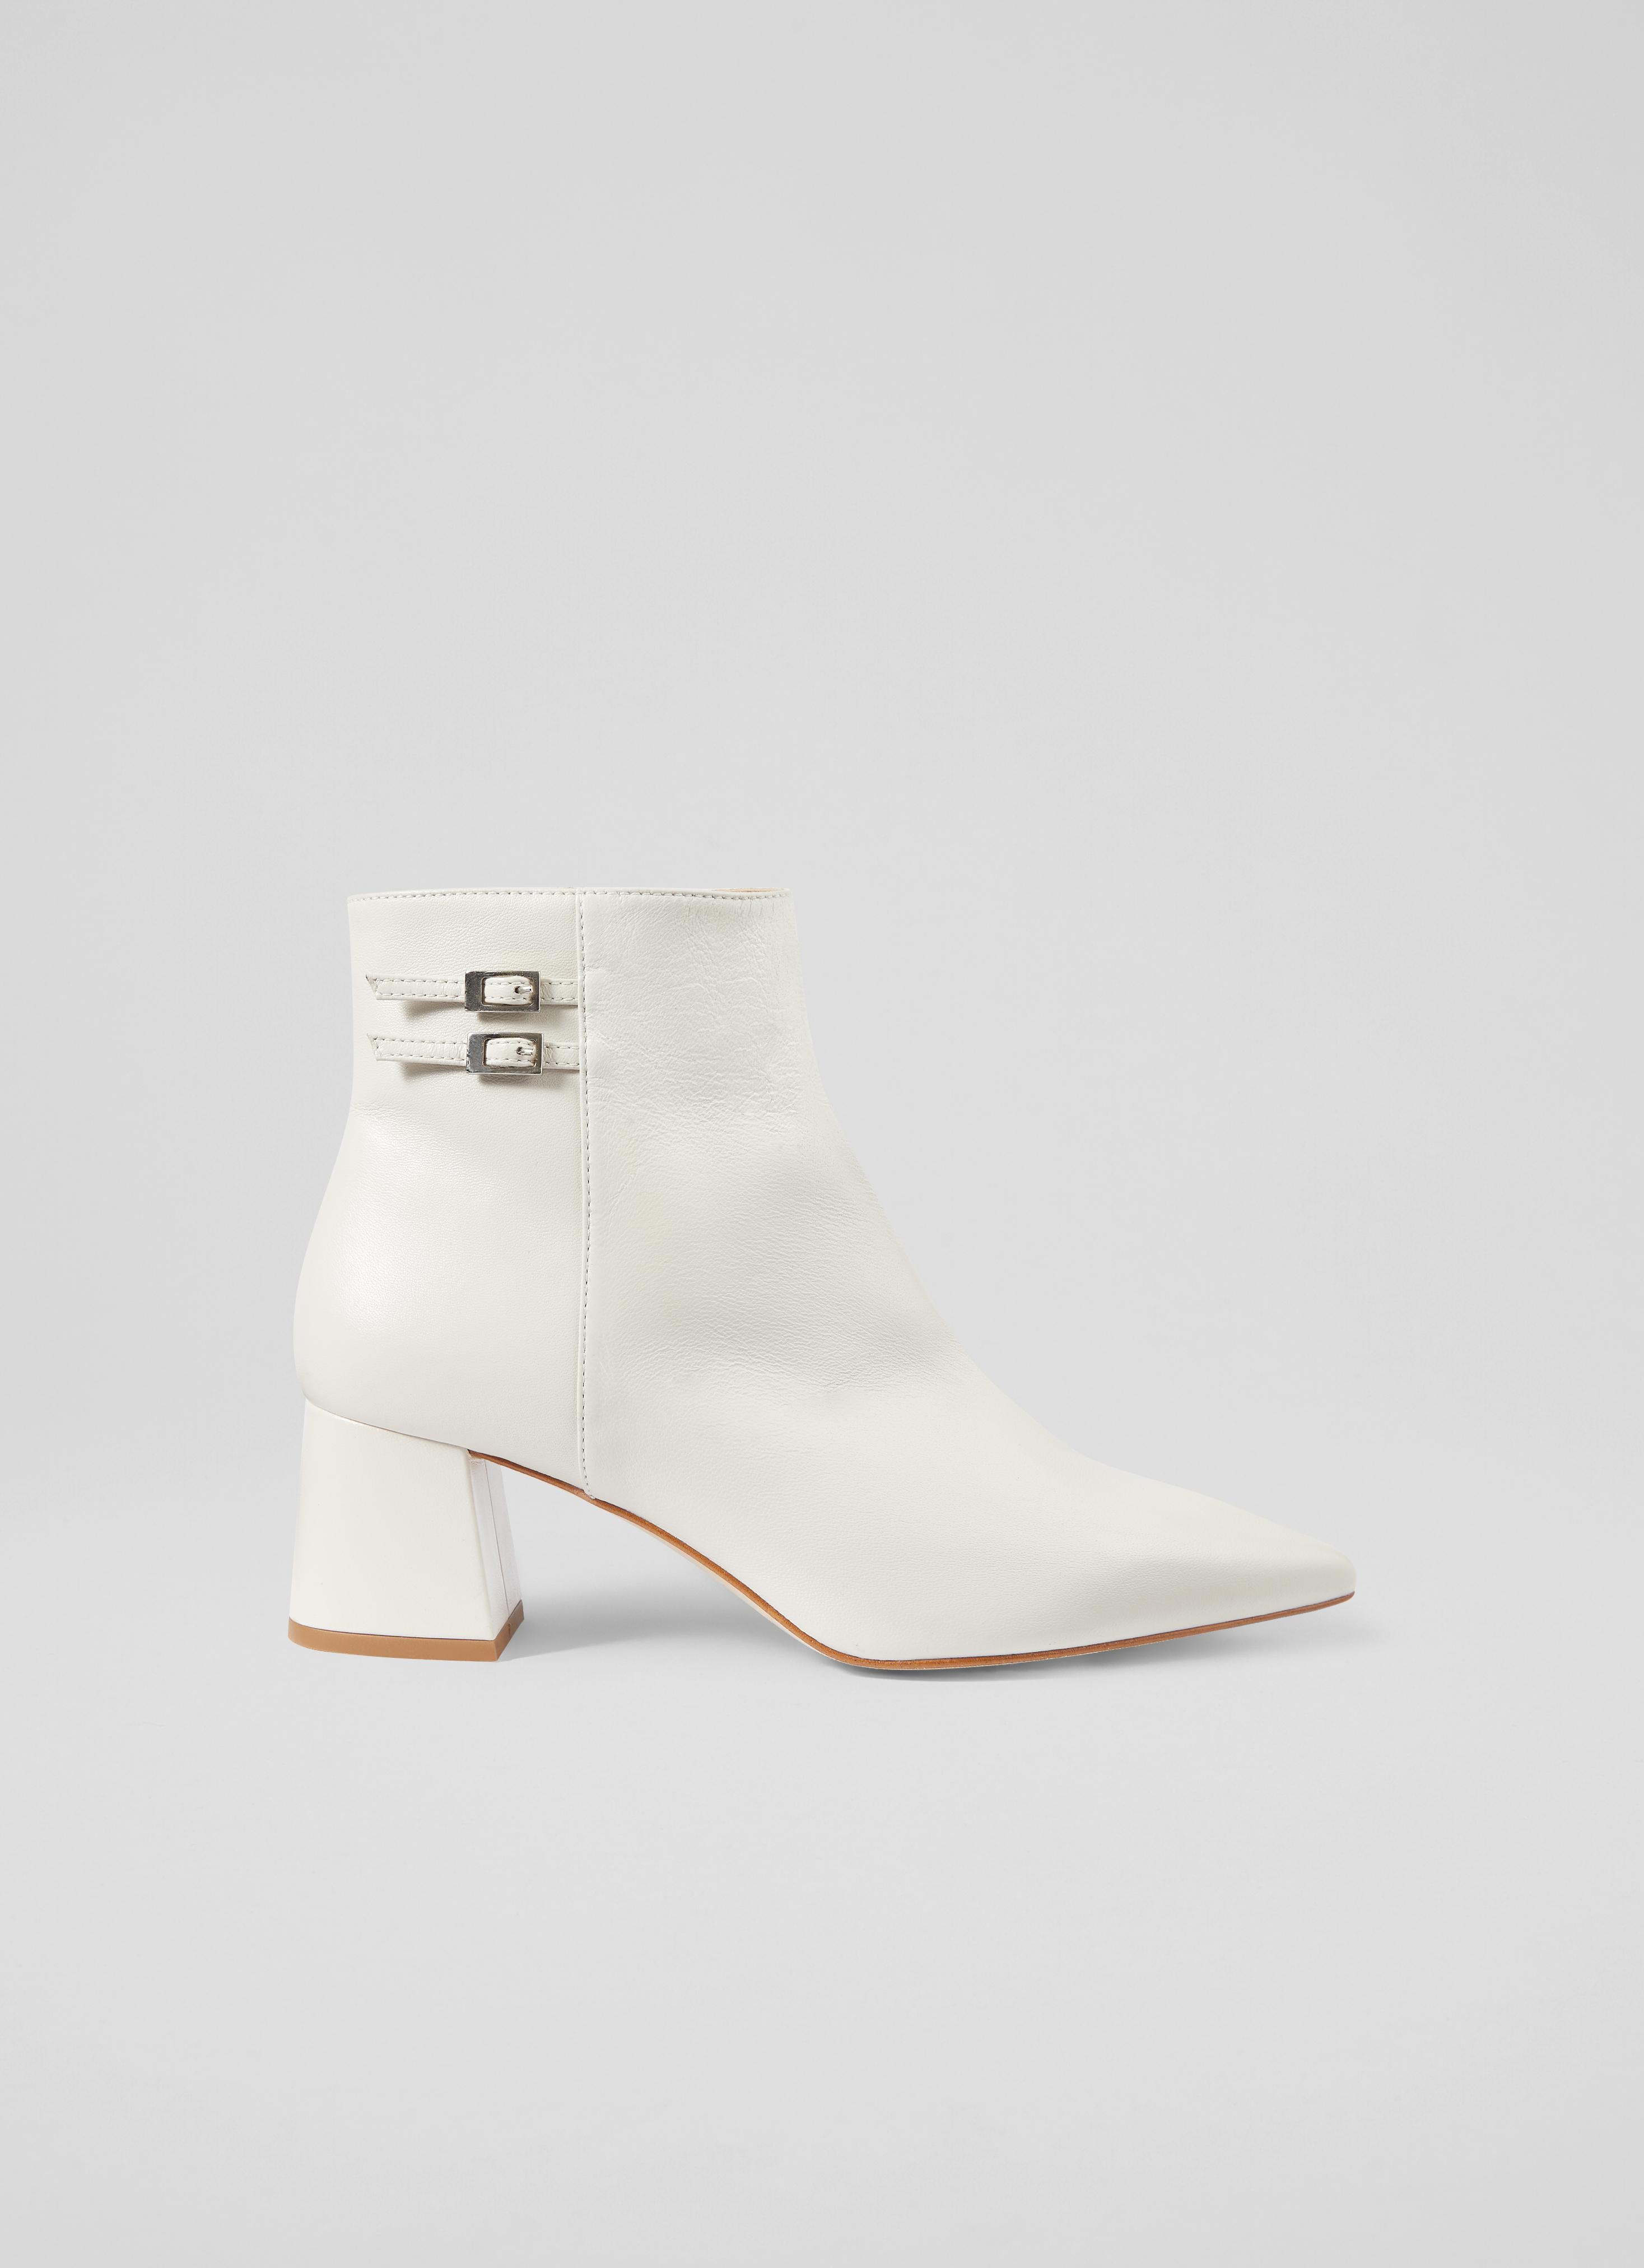 L.K.Bennett Missy Cream Leather Ankle Boots, Cream